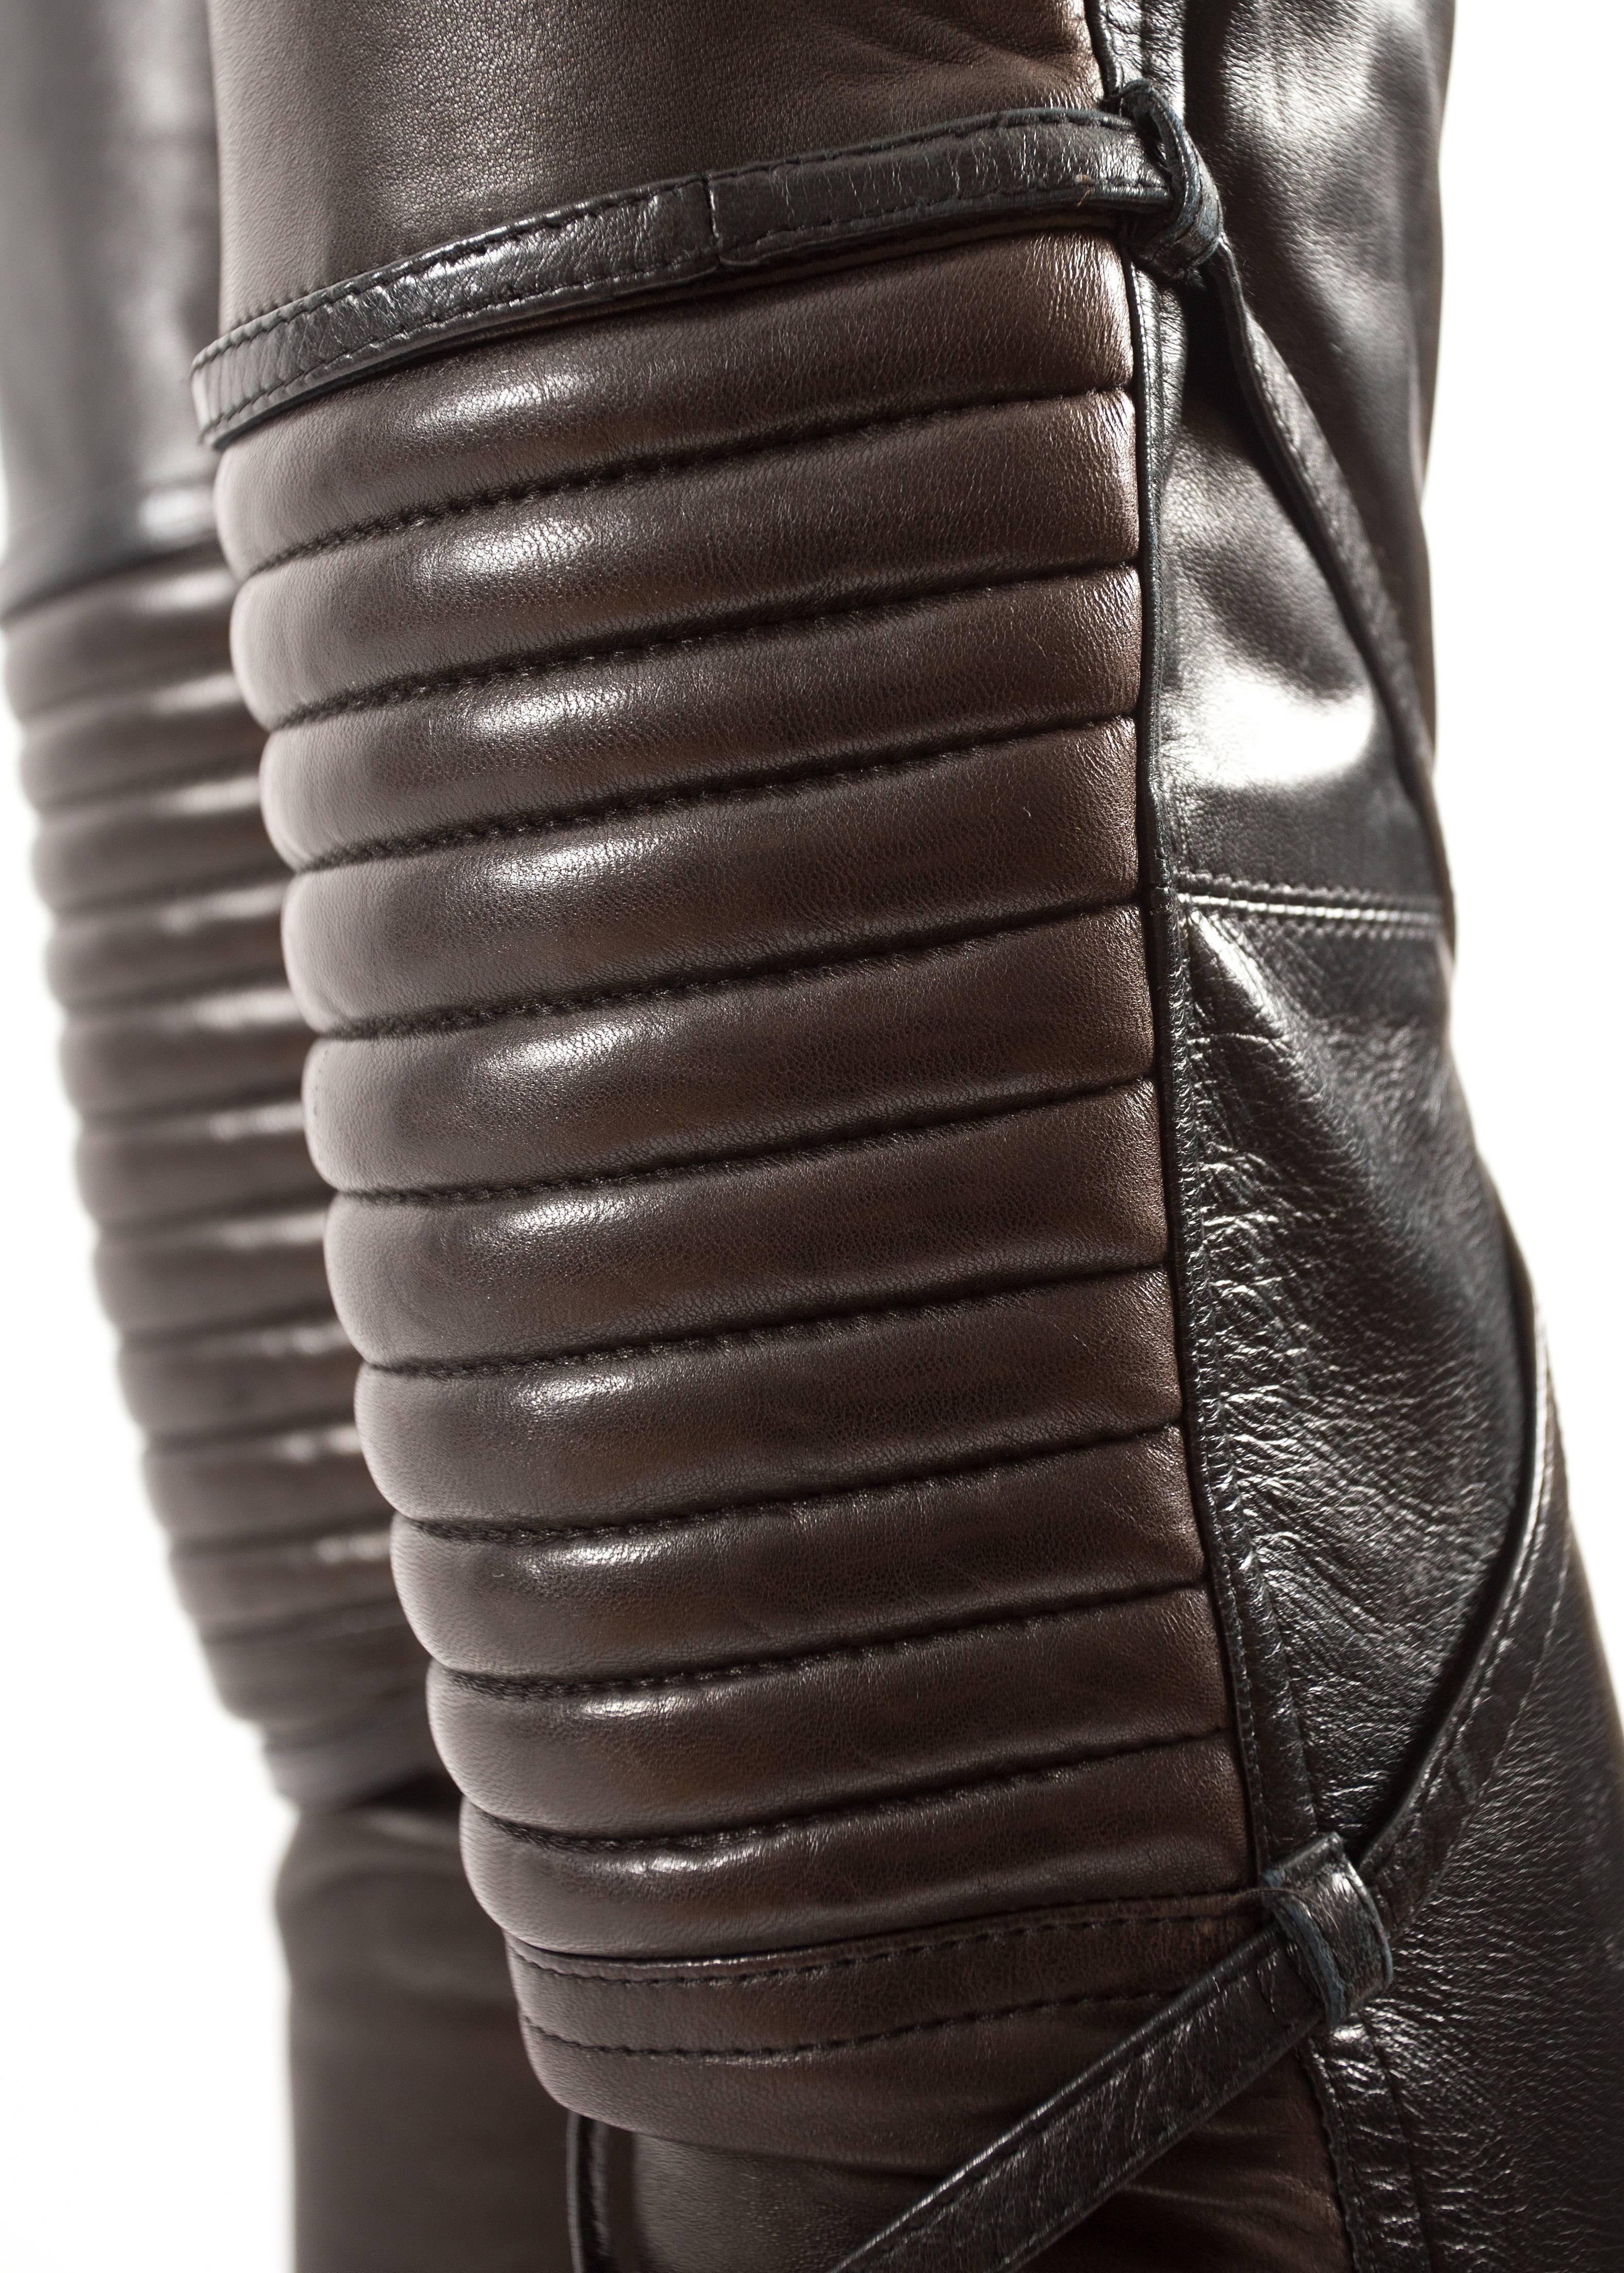 Jean Paul Gaultier Autumn-Winter 1990 black and brown leather biker pants In Good Condition For Sale In London, GB